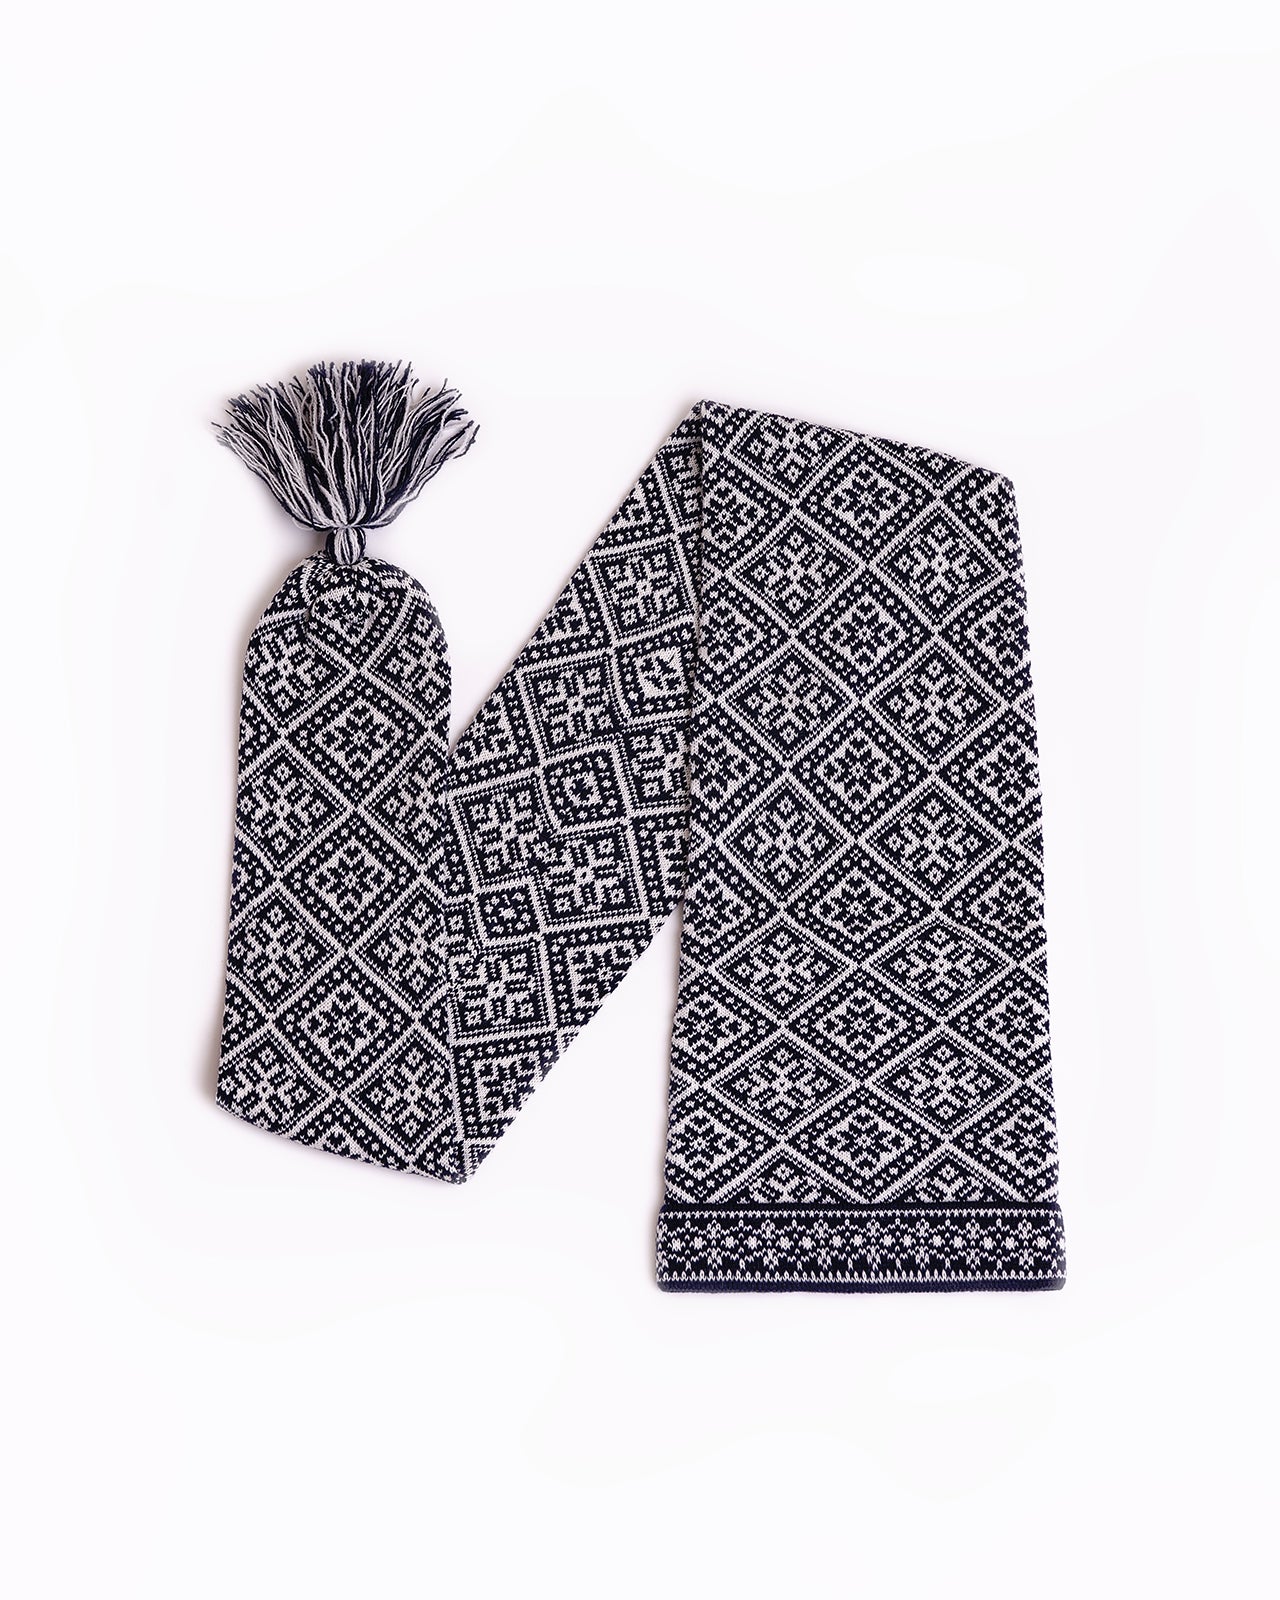 Traditional hat and Scarf together